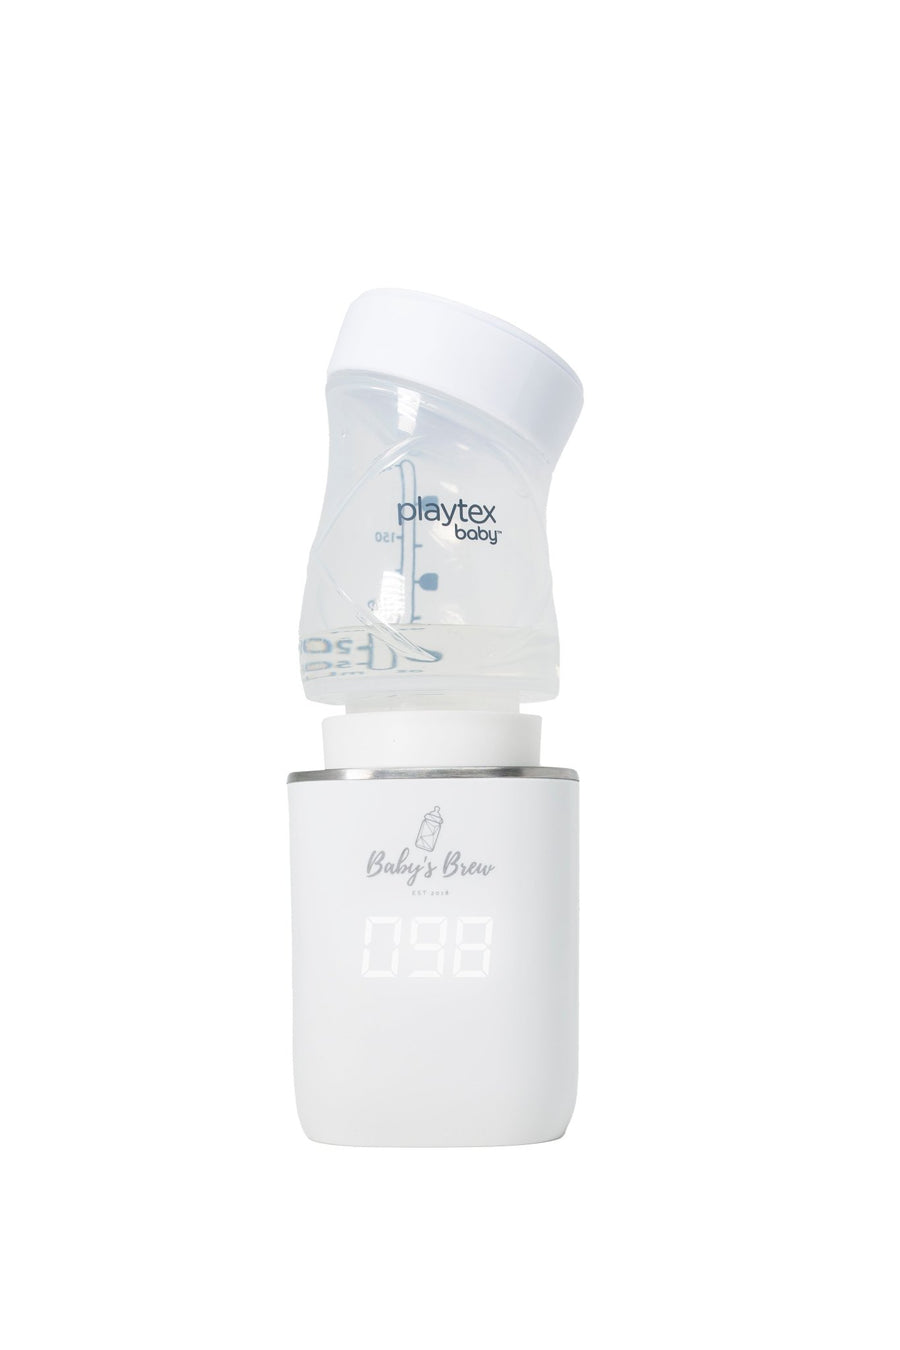 Playtex Ventaire Bottle Adapter - The Baby's Brew